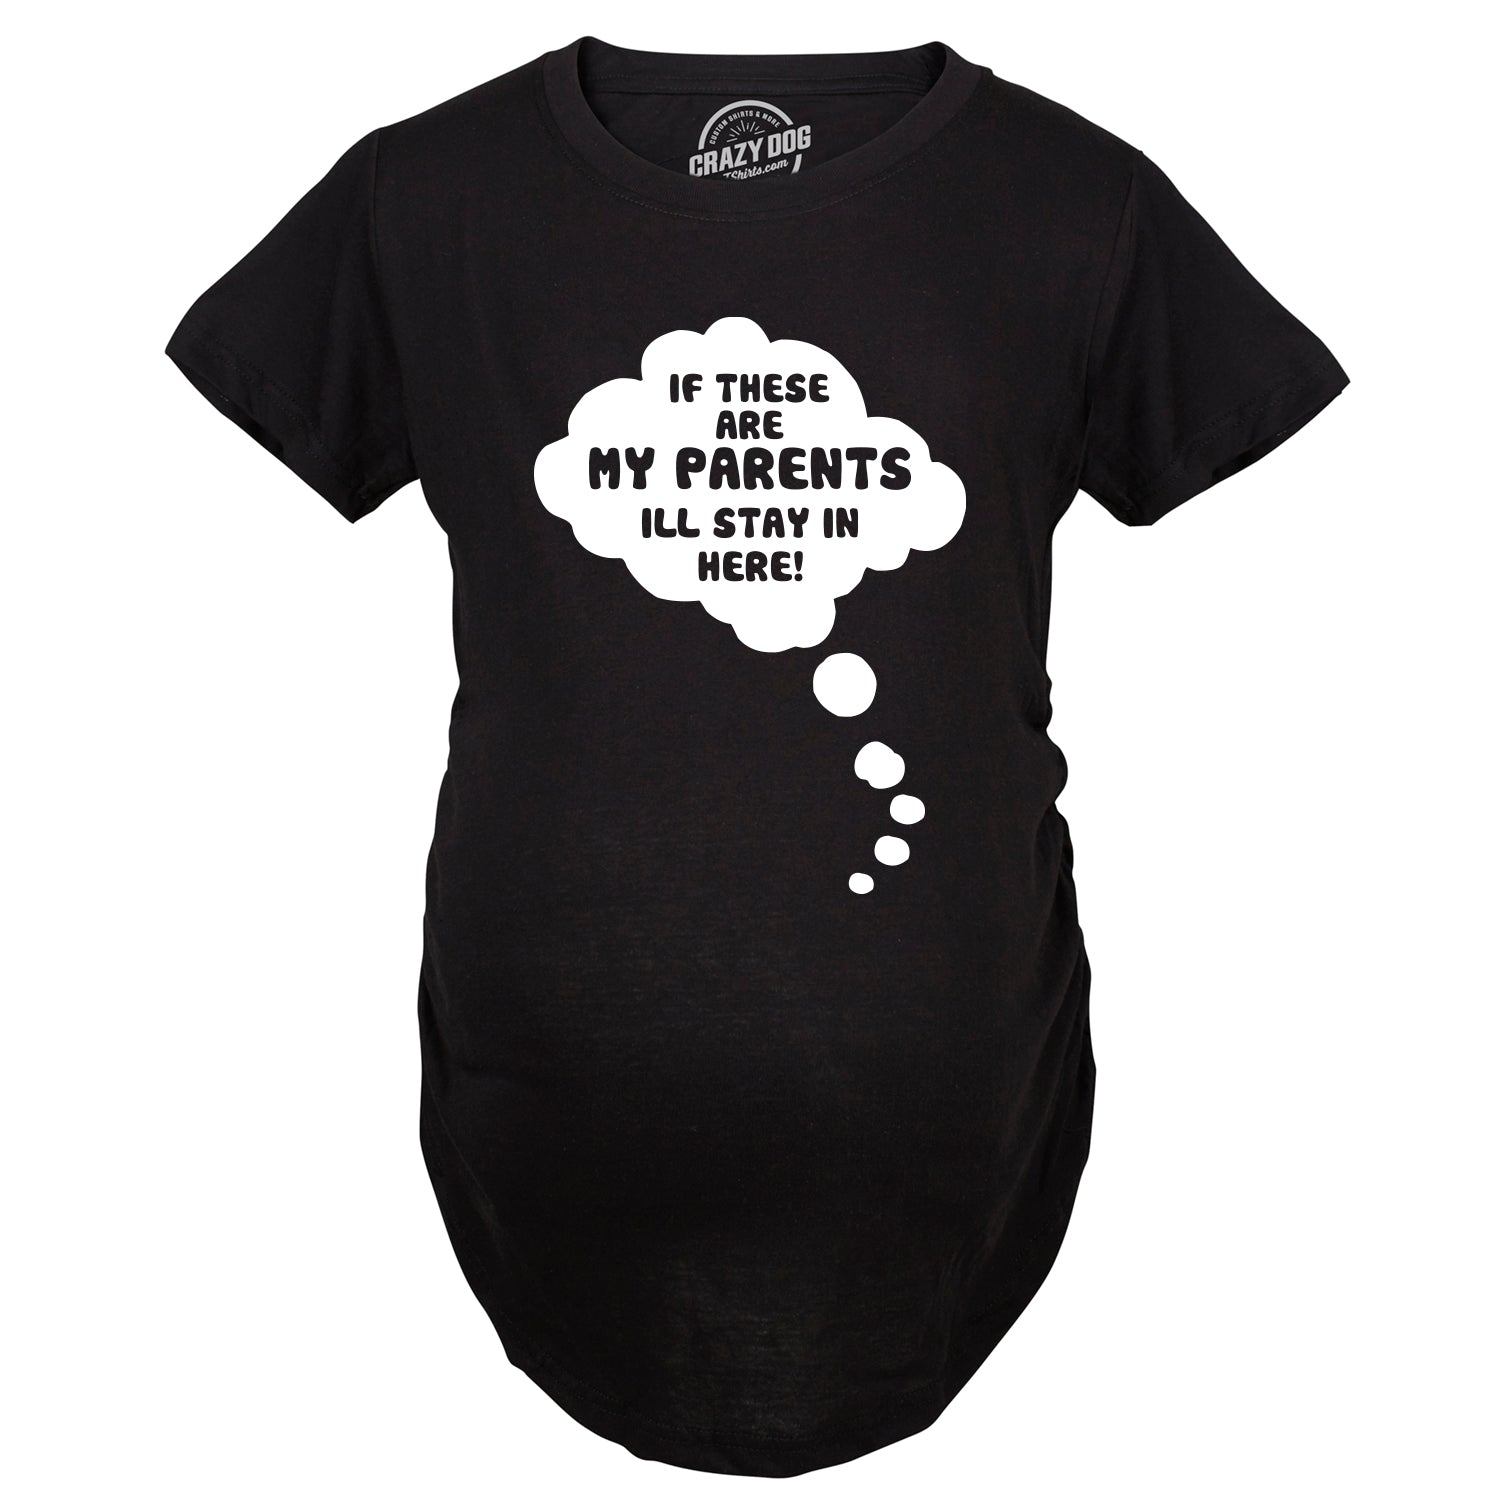 Funny Black If These Are My Parents I'll Stay In Here Maternity T Shirt Nerdy sarcastic Tee